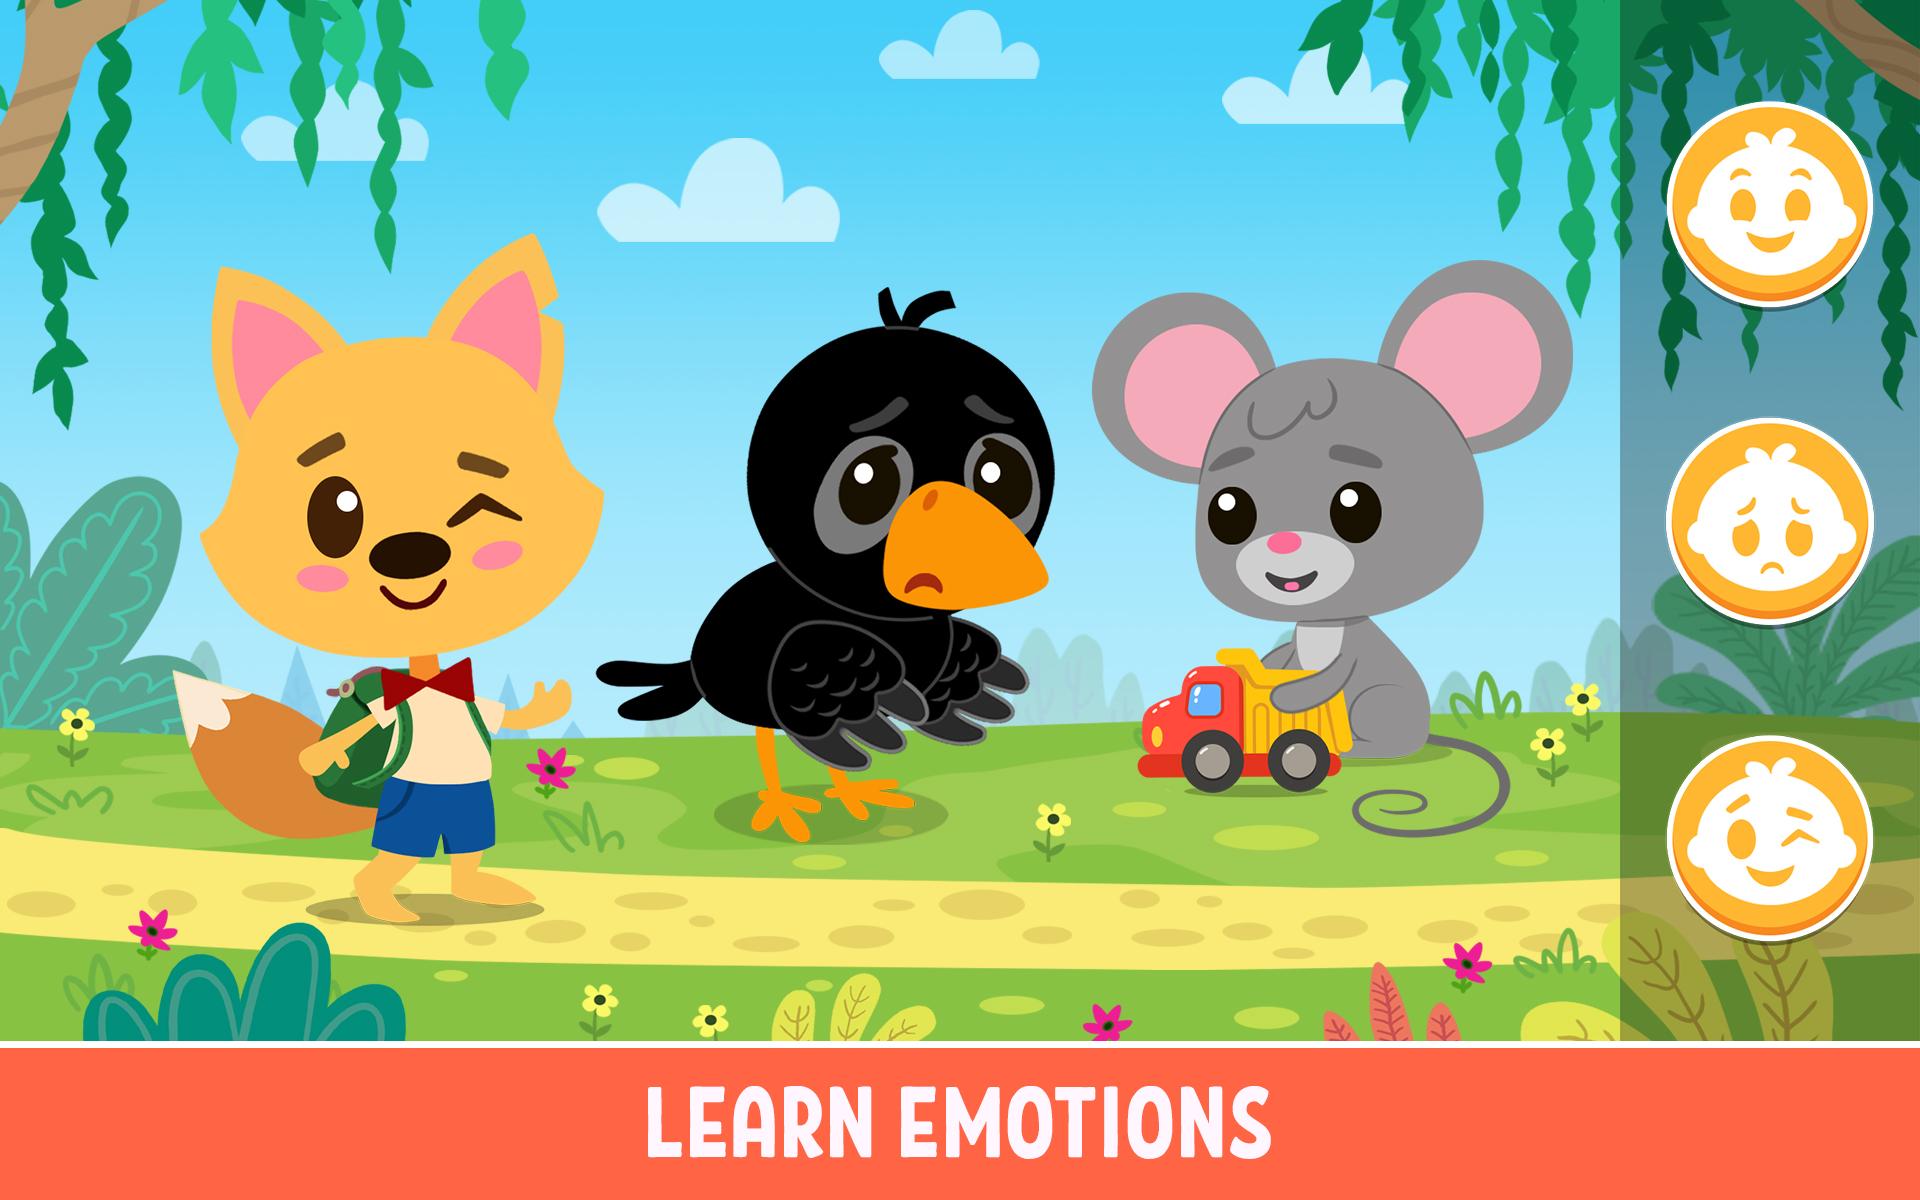 Kids Academy - learning games for toddlers 3.1.3 Screenshot 15